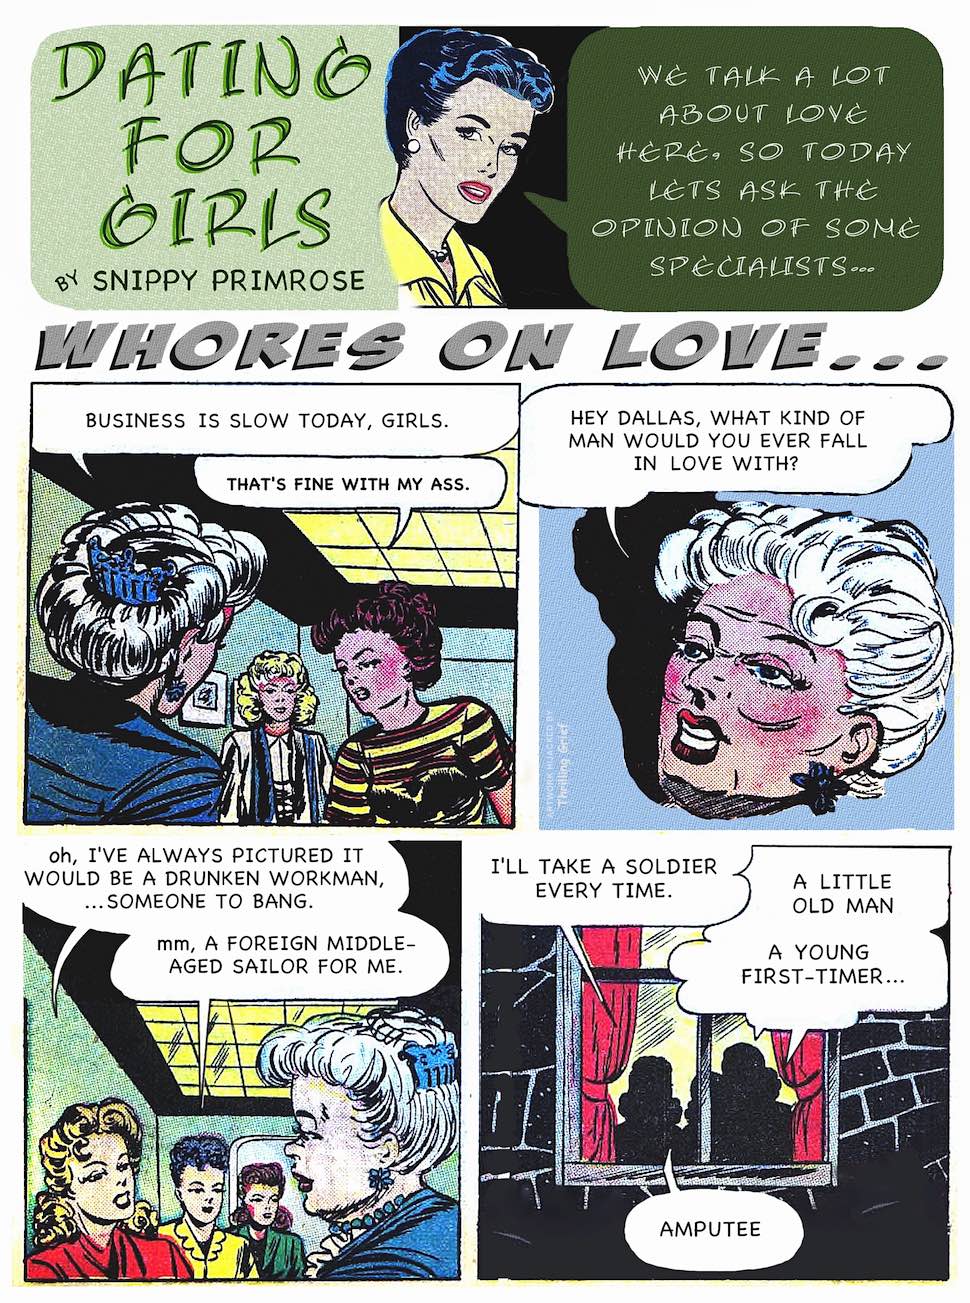 a comic book parody, re-witten comic books, sex workers talk about love